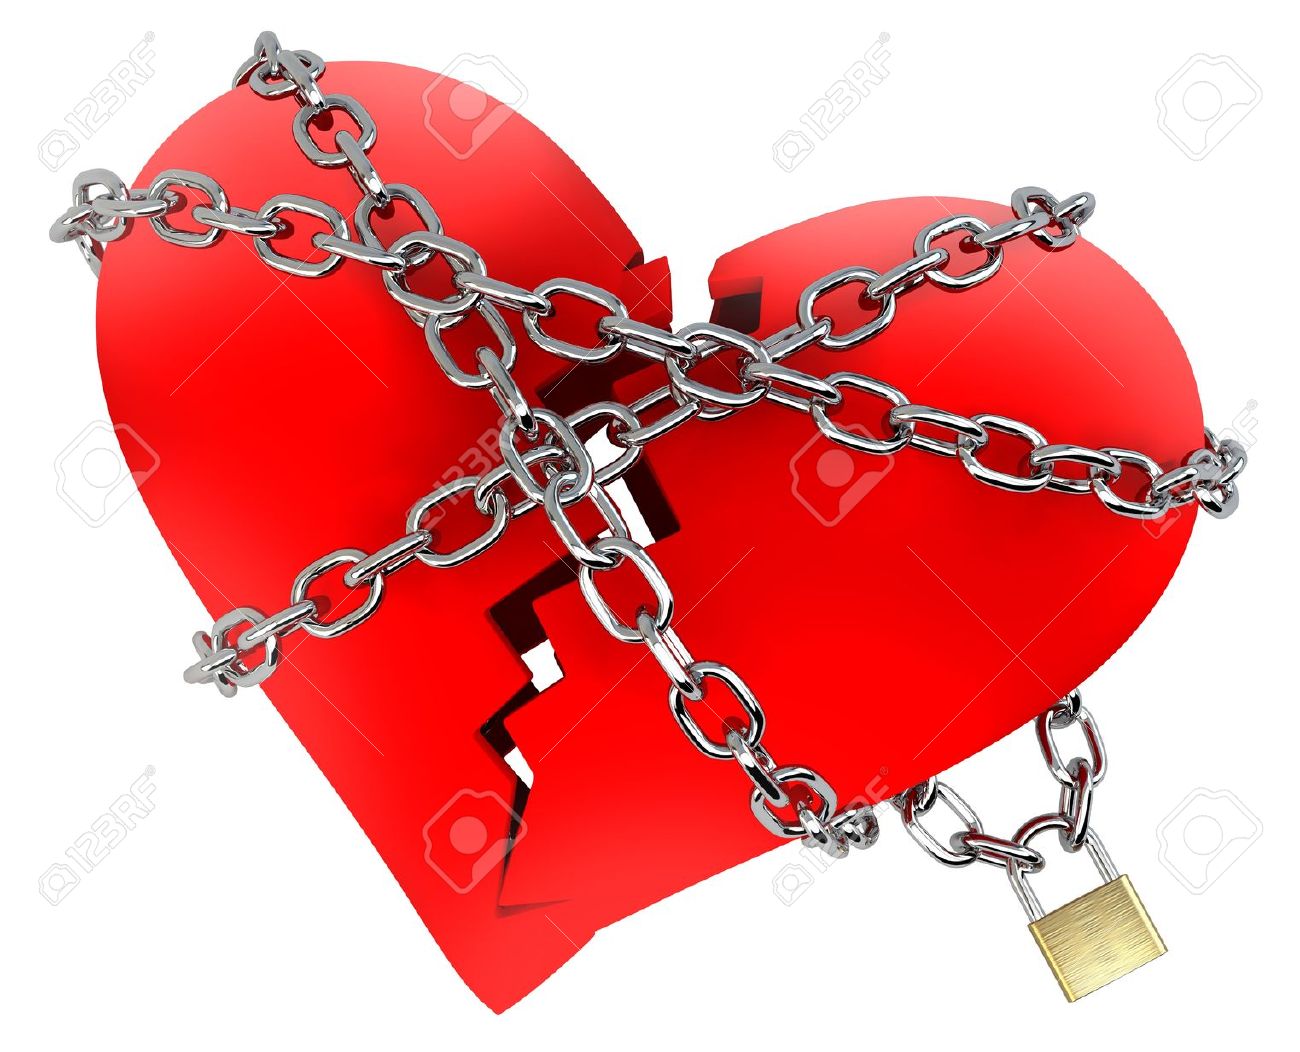 Red Broken Heart Wrapped In Chain